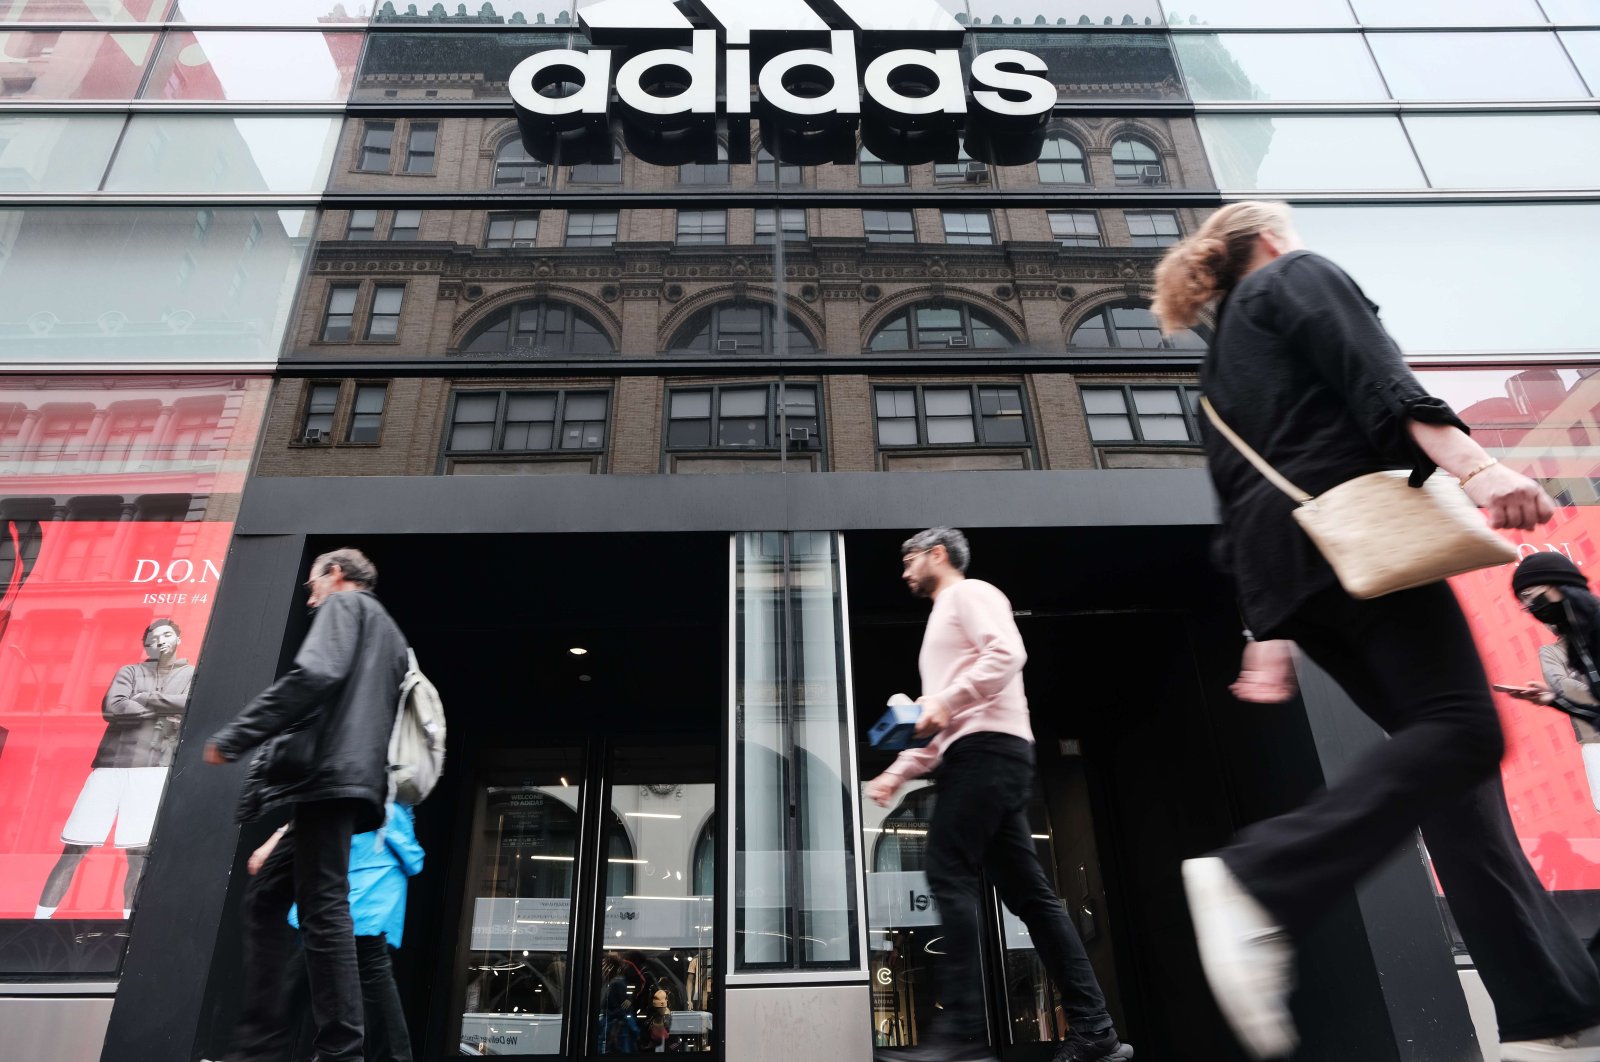 The entrance of an Adidas store pictured in Manhattan, New York City, U.S., Oct. 25, 2022. (AFP Photo)